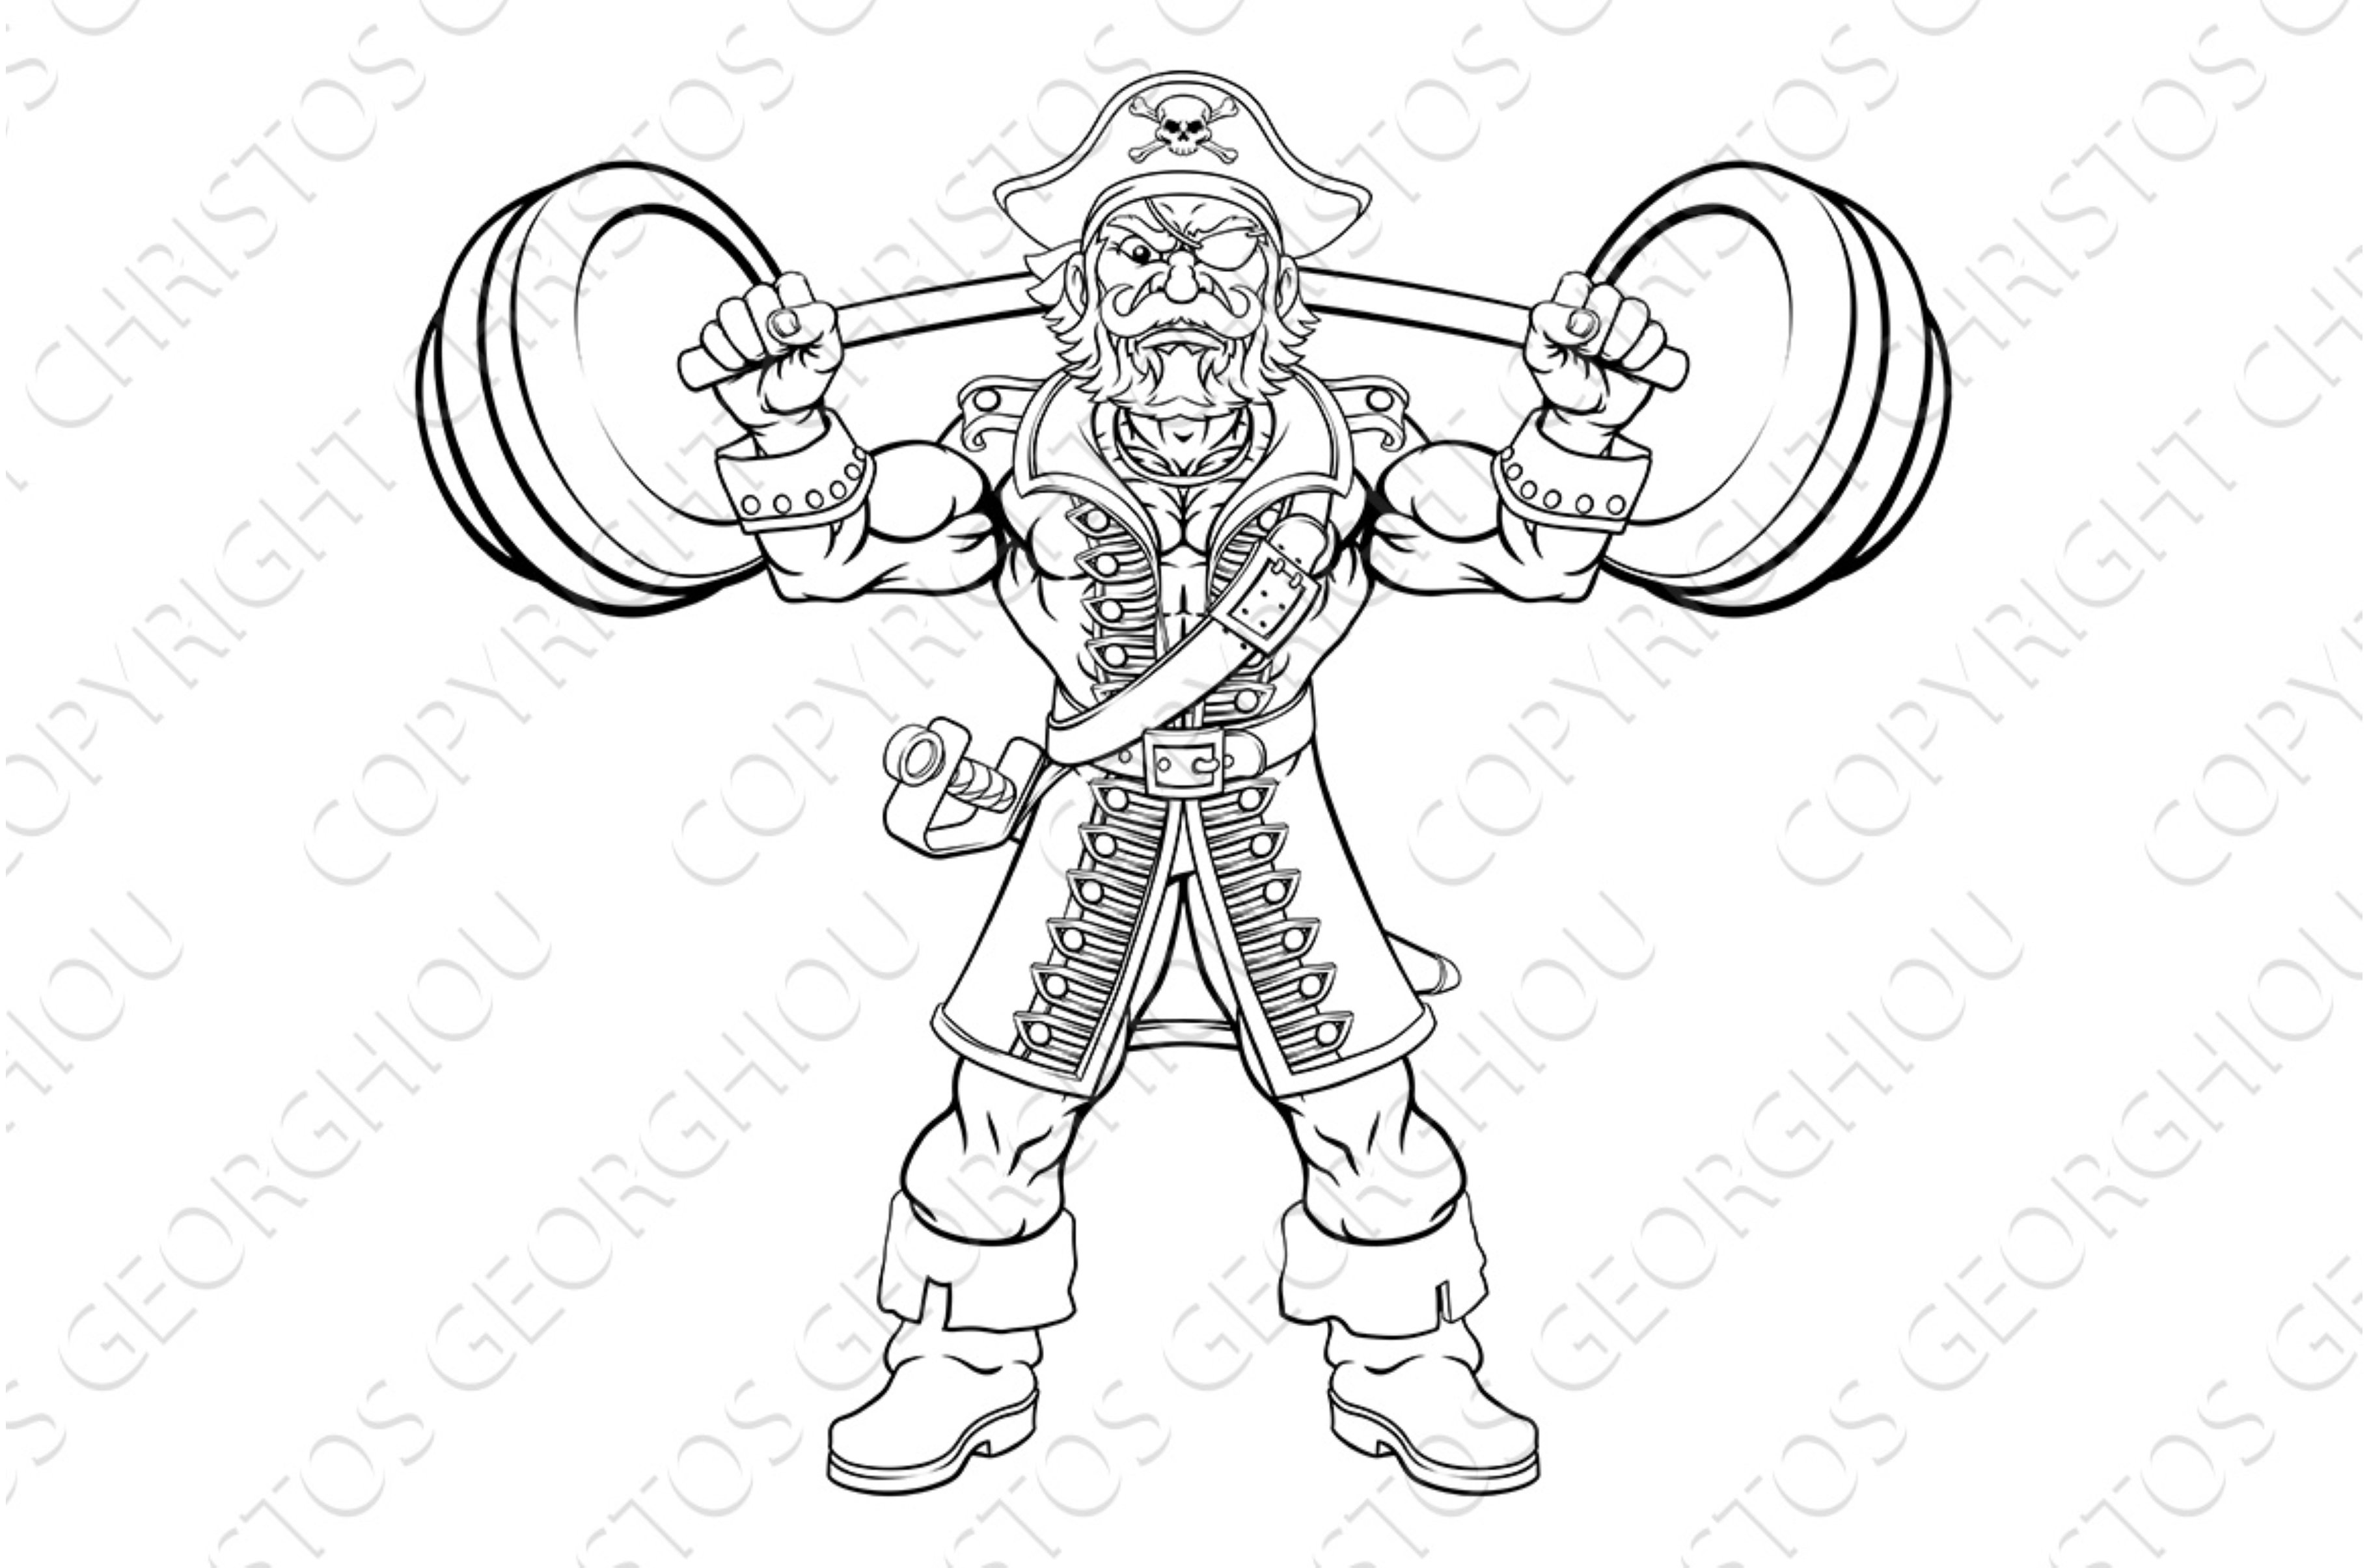 Pirate Weight Lifting Barbell cover image.